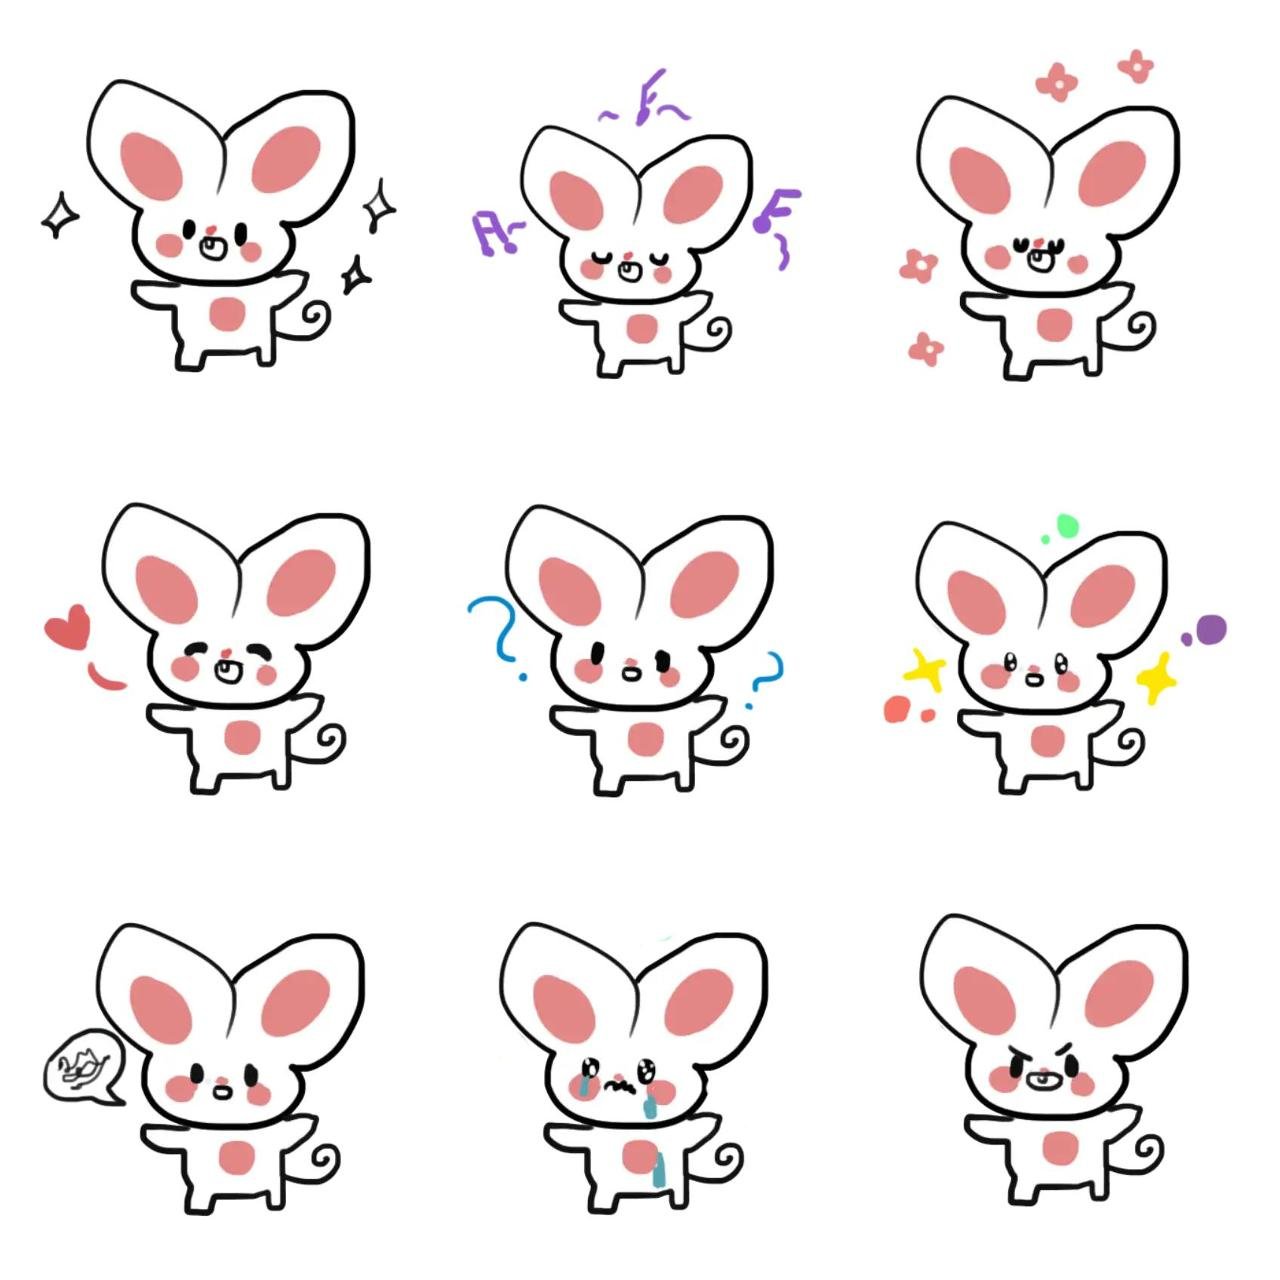 a friendly mouse Animation/Cartoon,Animals sticker pack for Whatsapp, Telegram, Signal, and others chatting and message apps